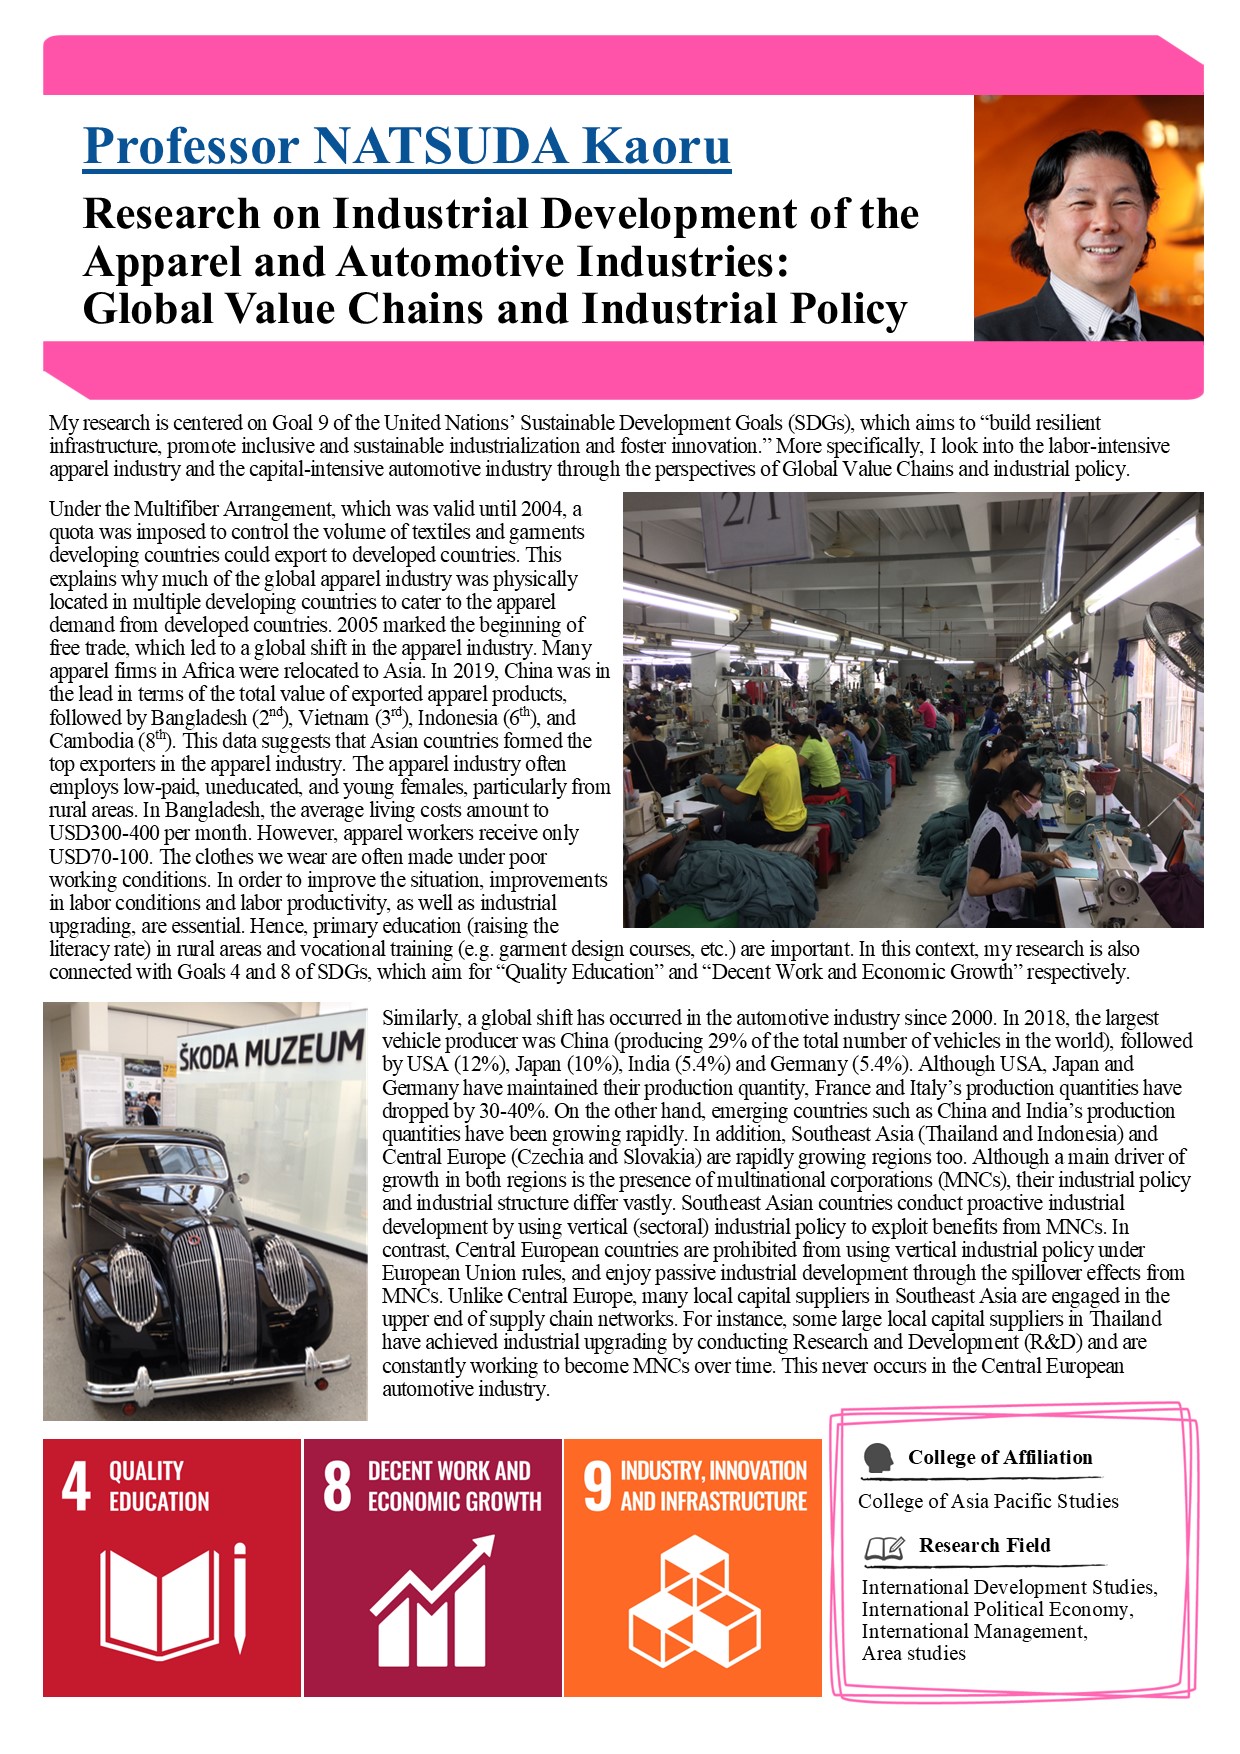 Research on Industrial Development of the Apparel and Automotive Industries: Global Value Chains and Industrial Policy